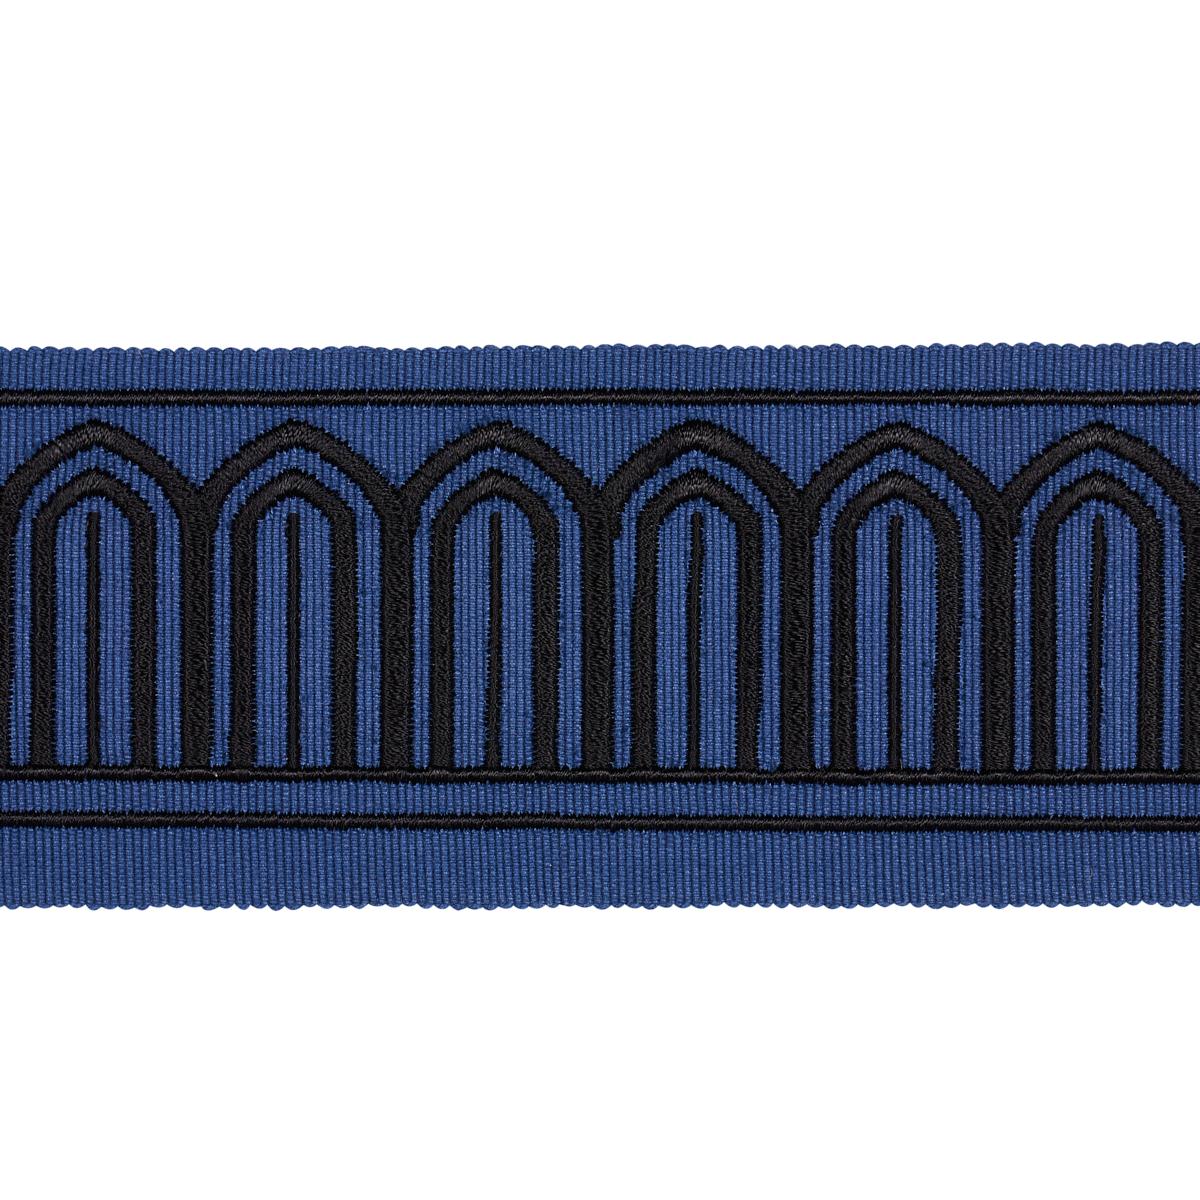 ARCHES EMBROIDERED TAPE MEDIUM_BLACK ON NAVY